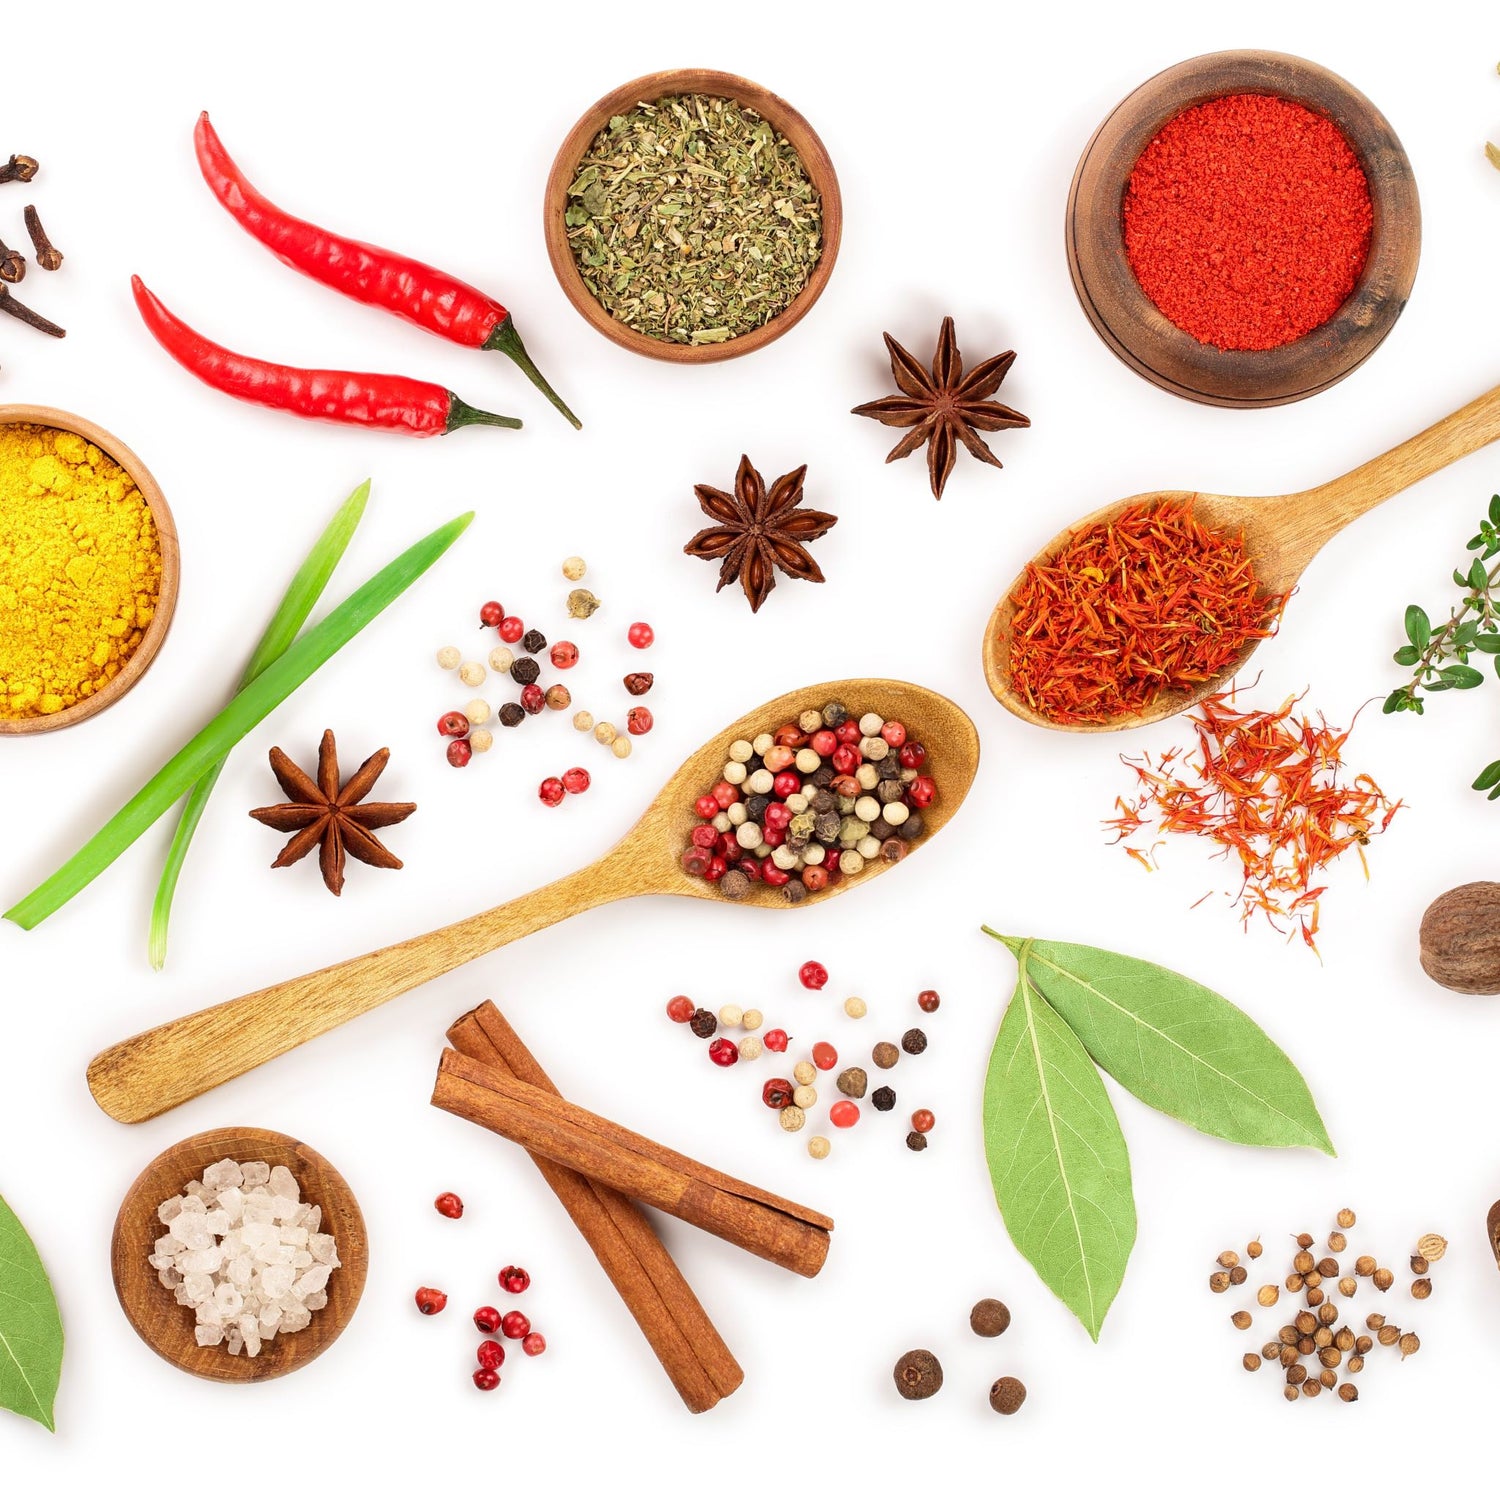 Various spices and herbs on white background